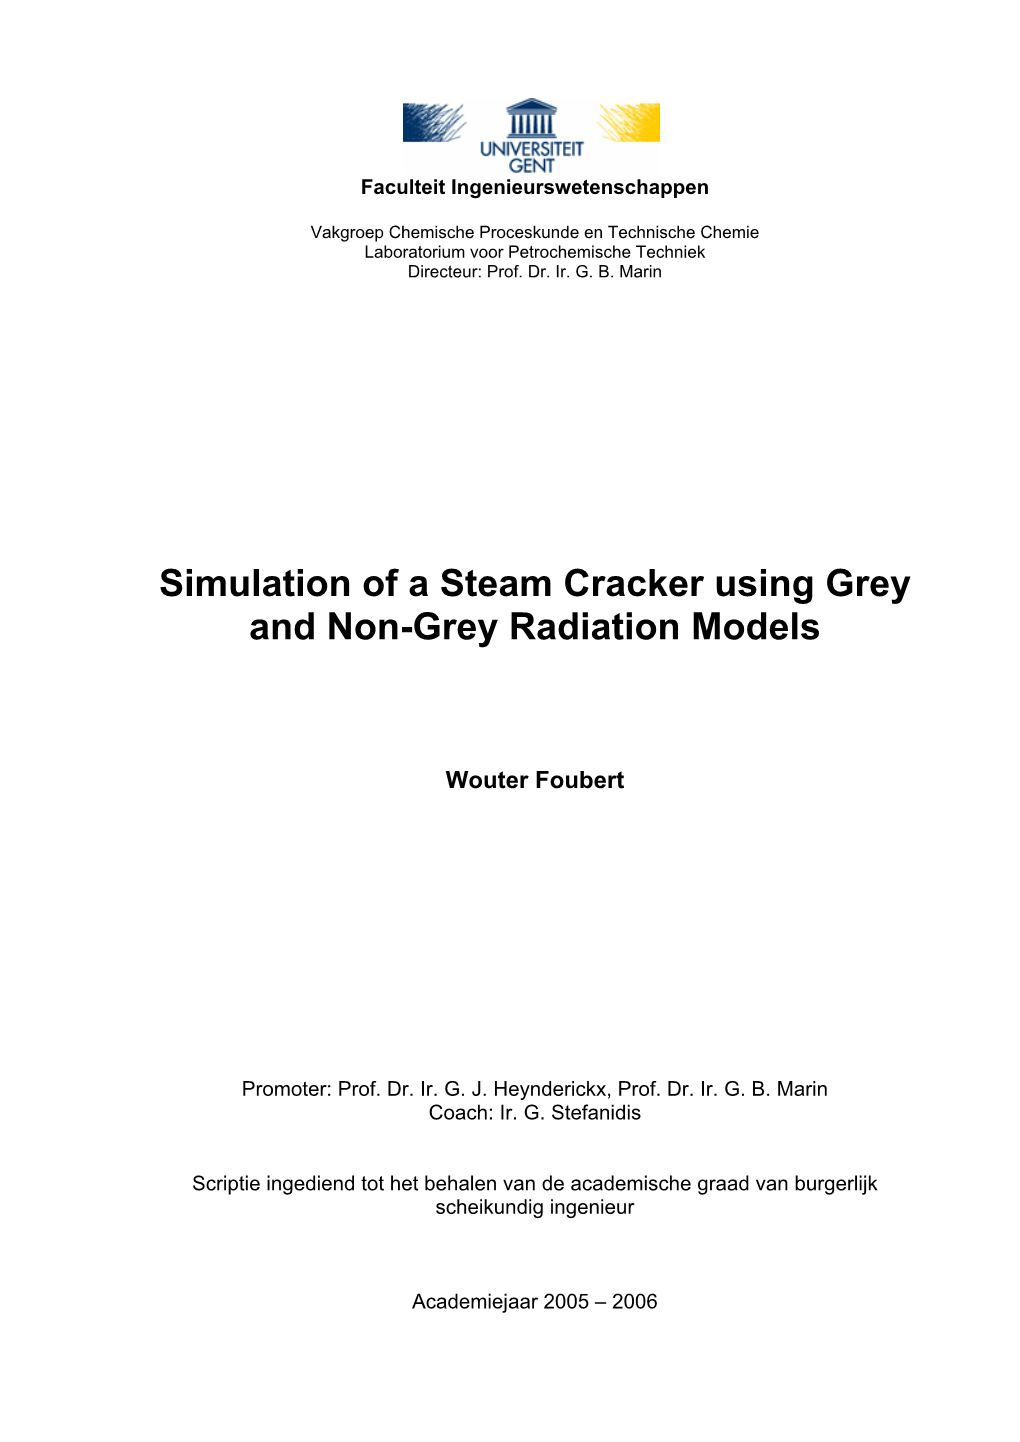 Simulation of a Steam Cracker Using Grey and Non-Grey Radiation Models